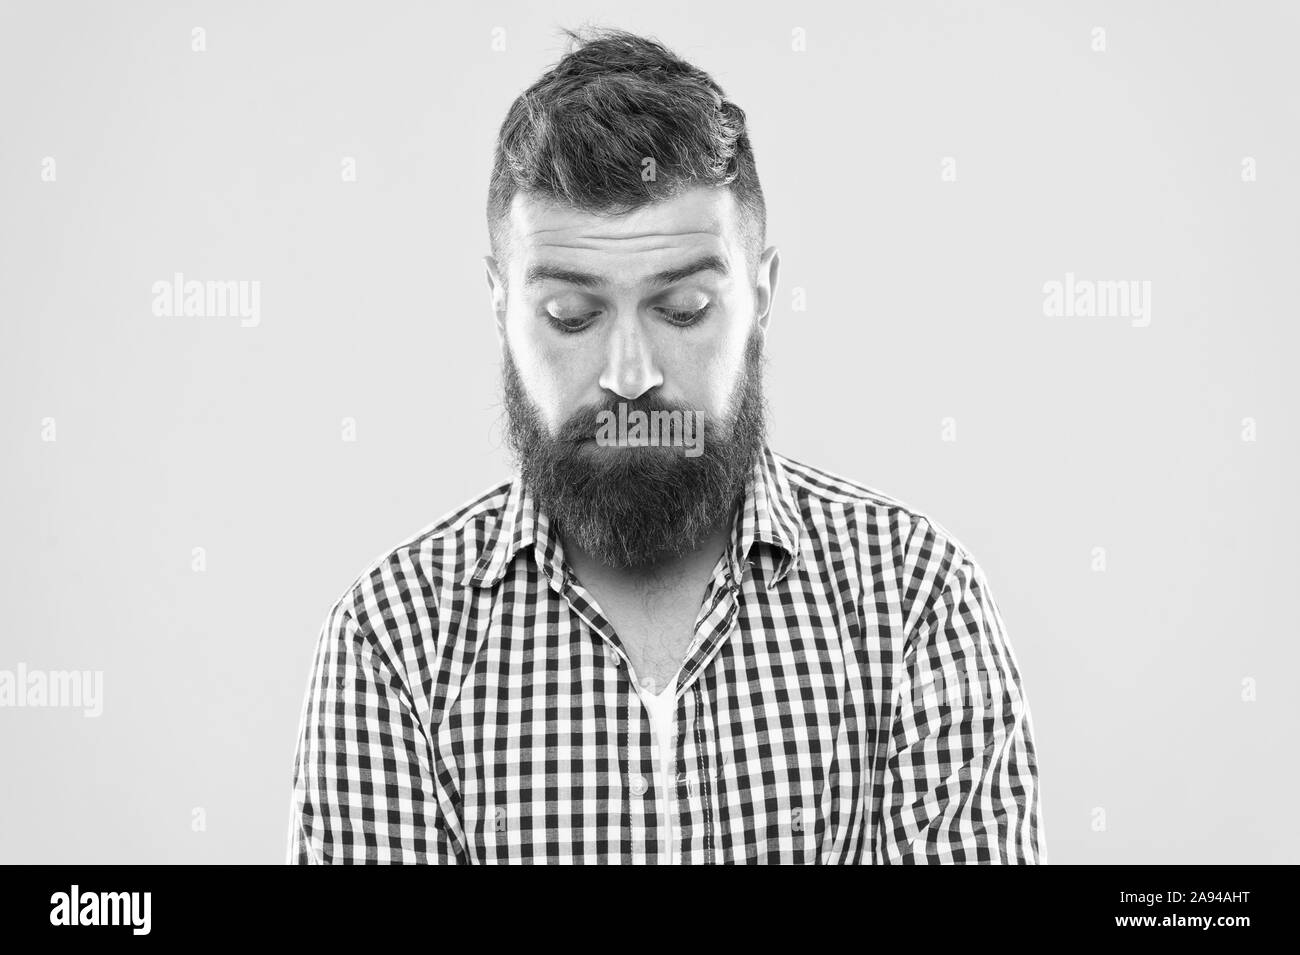 Feeling sorry. Embarrassment concept. Feel so sorry. Man bearded regretful face. Guy bearded sorry. Ask for apologies. Man with beard looks pitiful. Man regret about done and ask to forgive him. Stock Photo